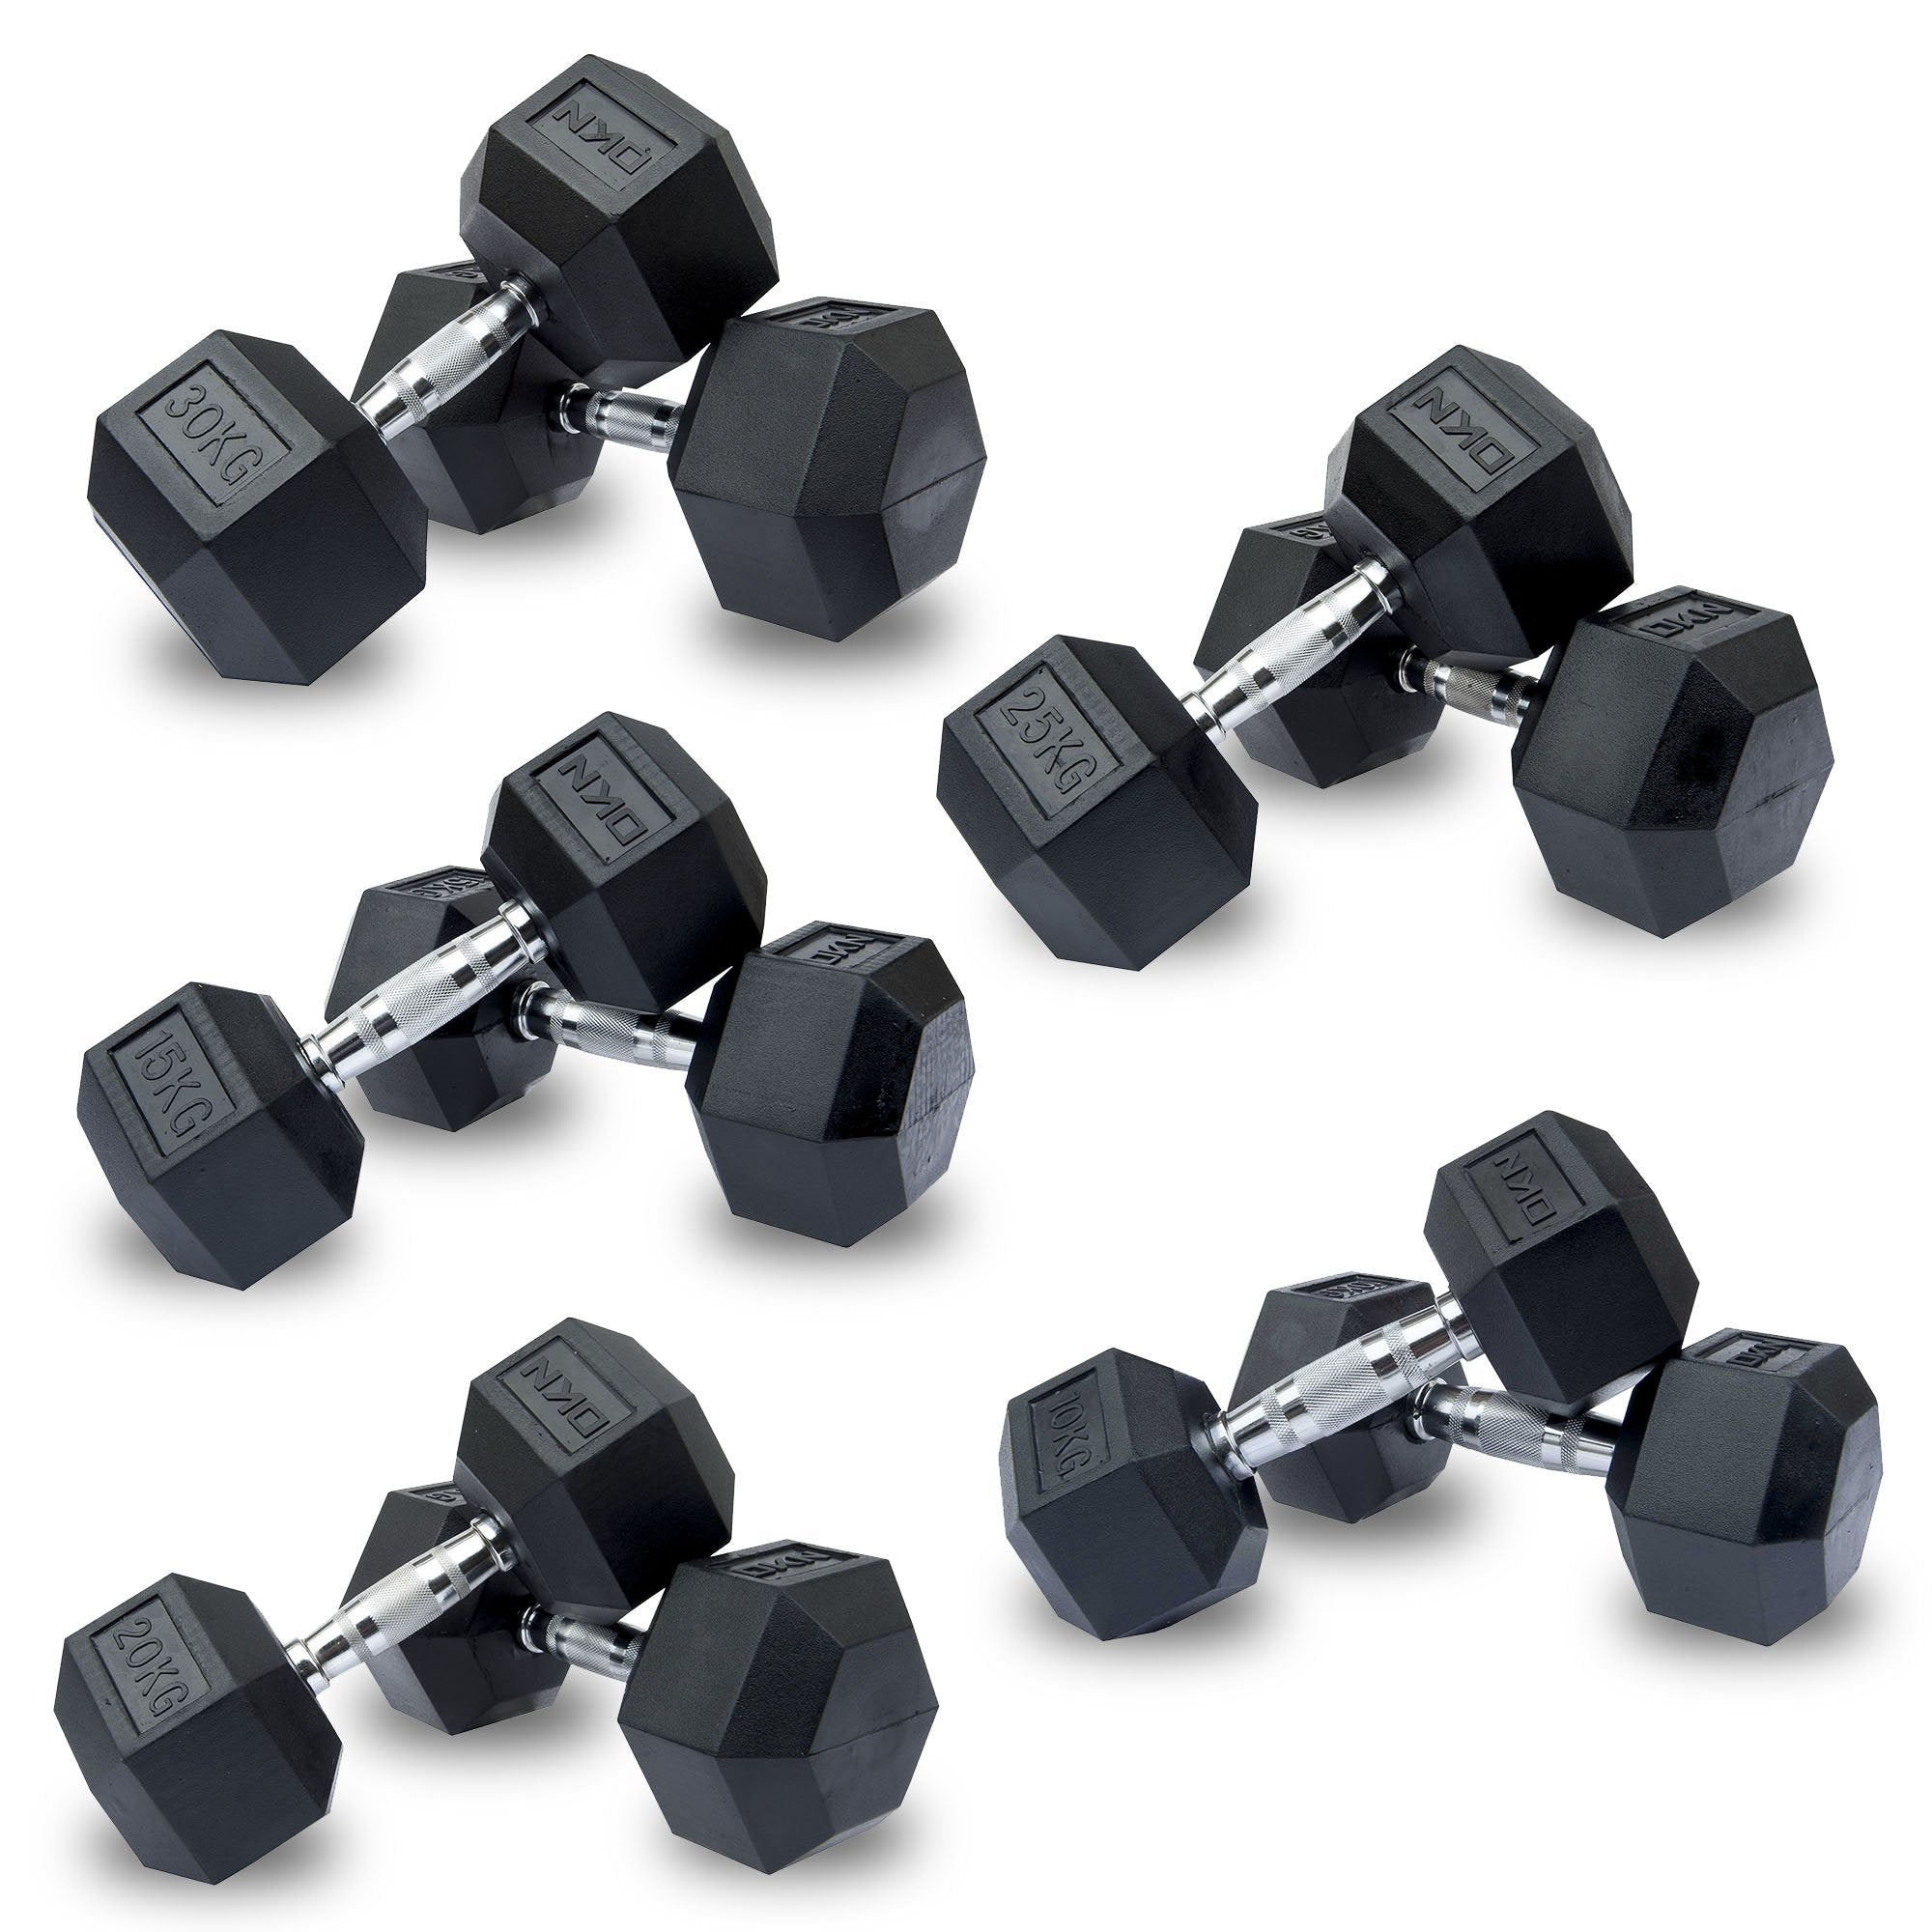 DKN 10kg to 30kg Rubber Hex Dumbbell Set – 5 Pairs